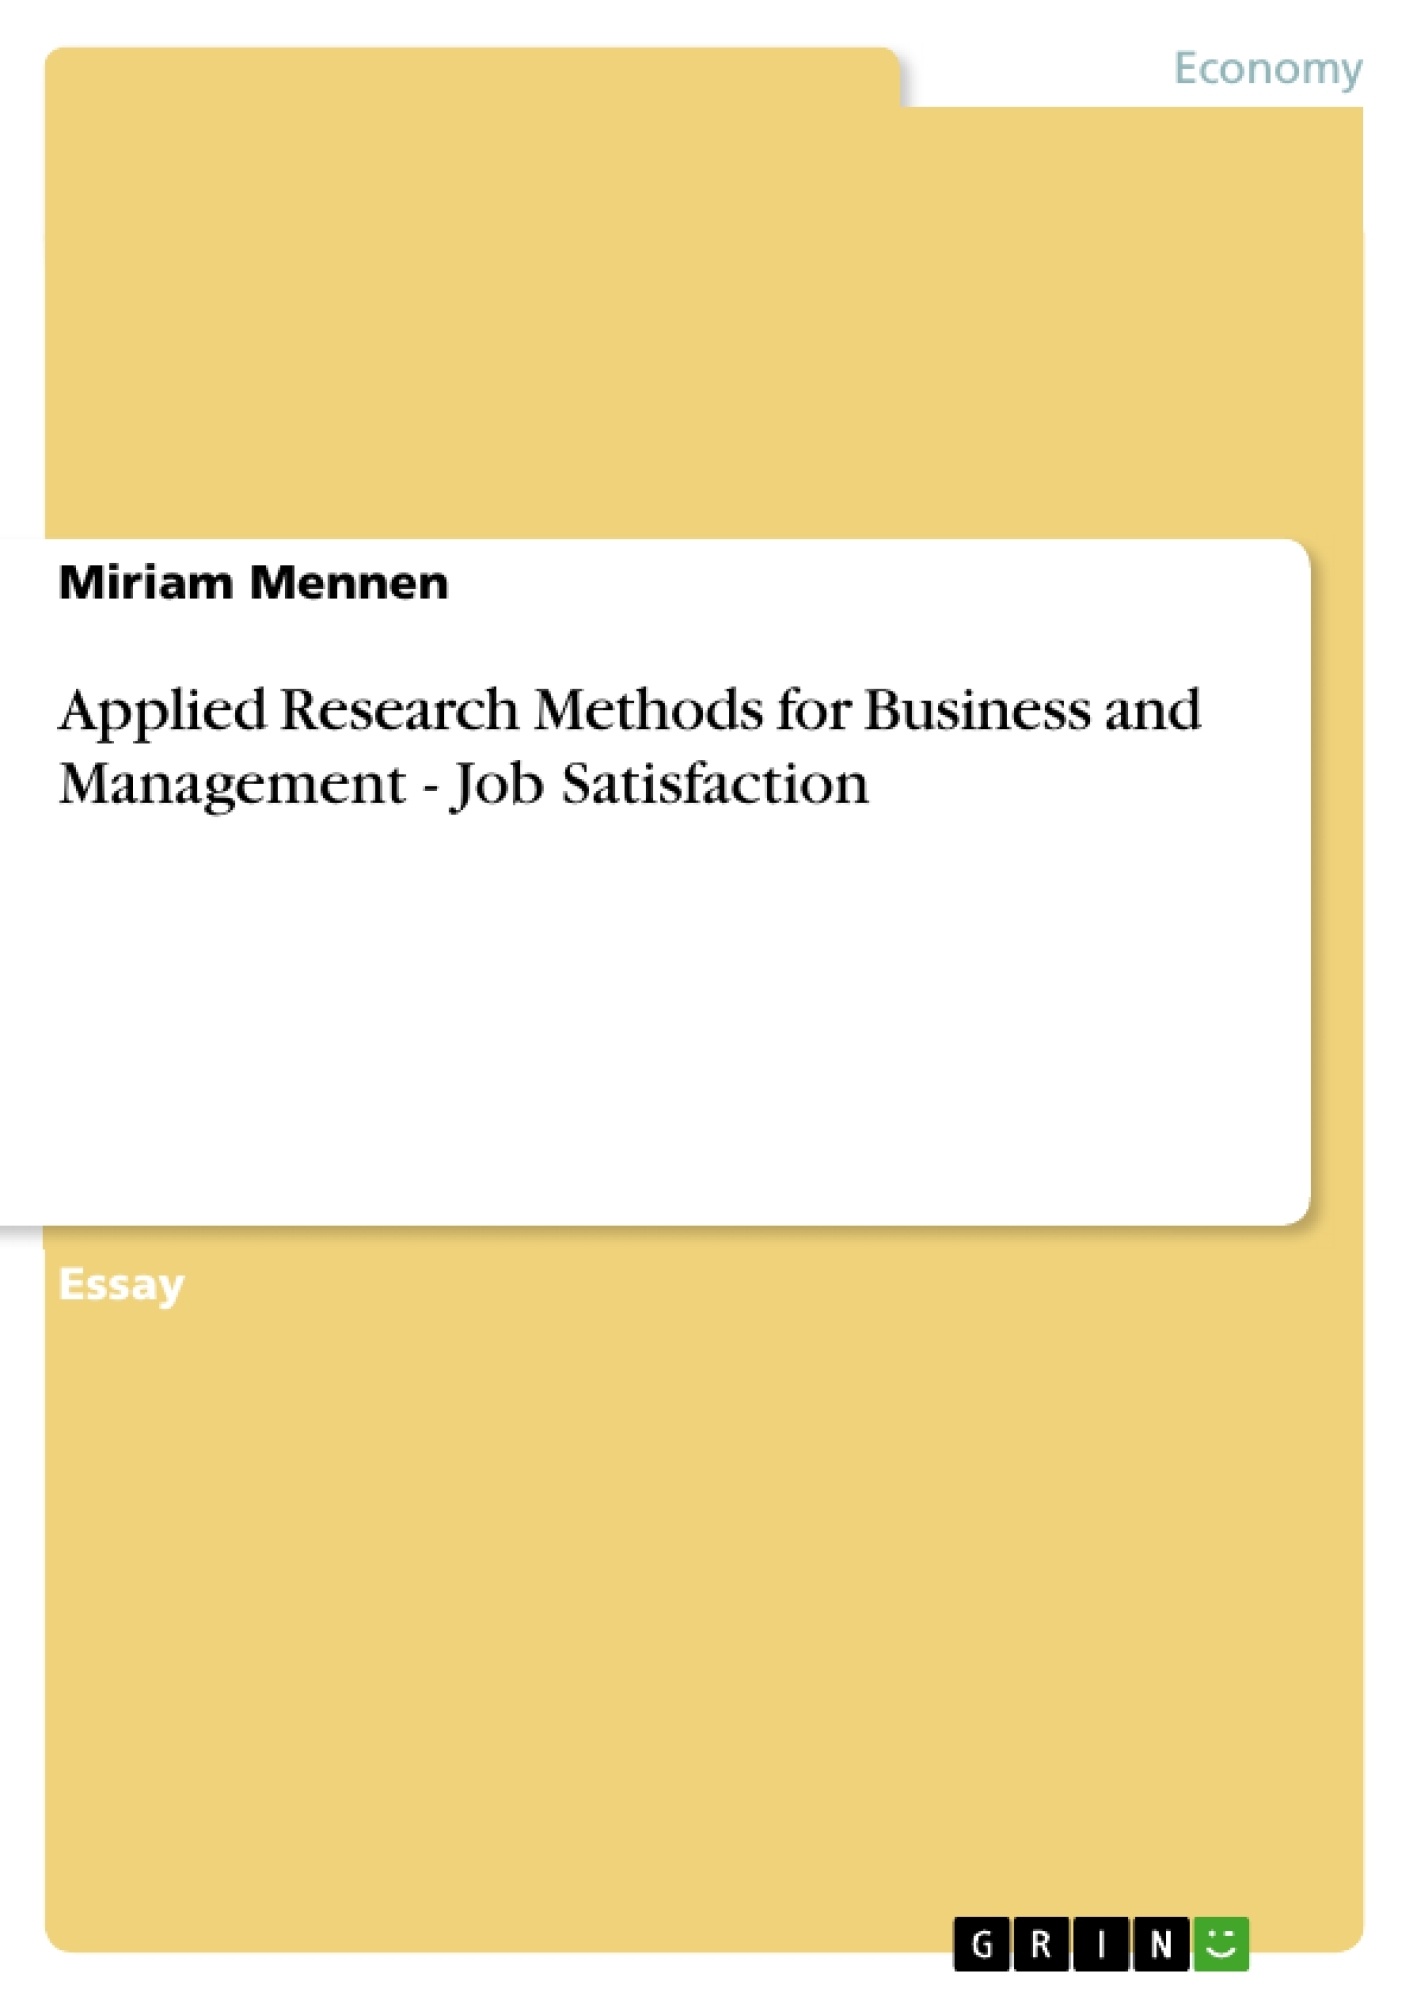 management by bartol and martin pdf download